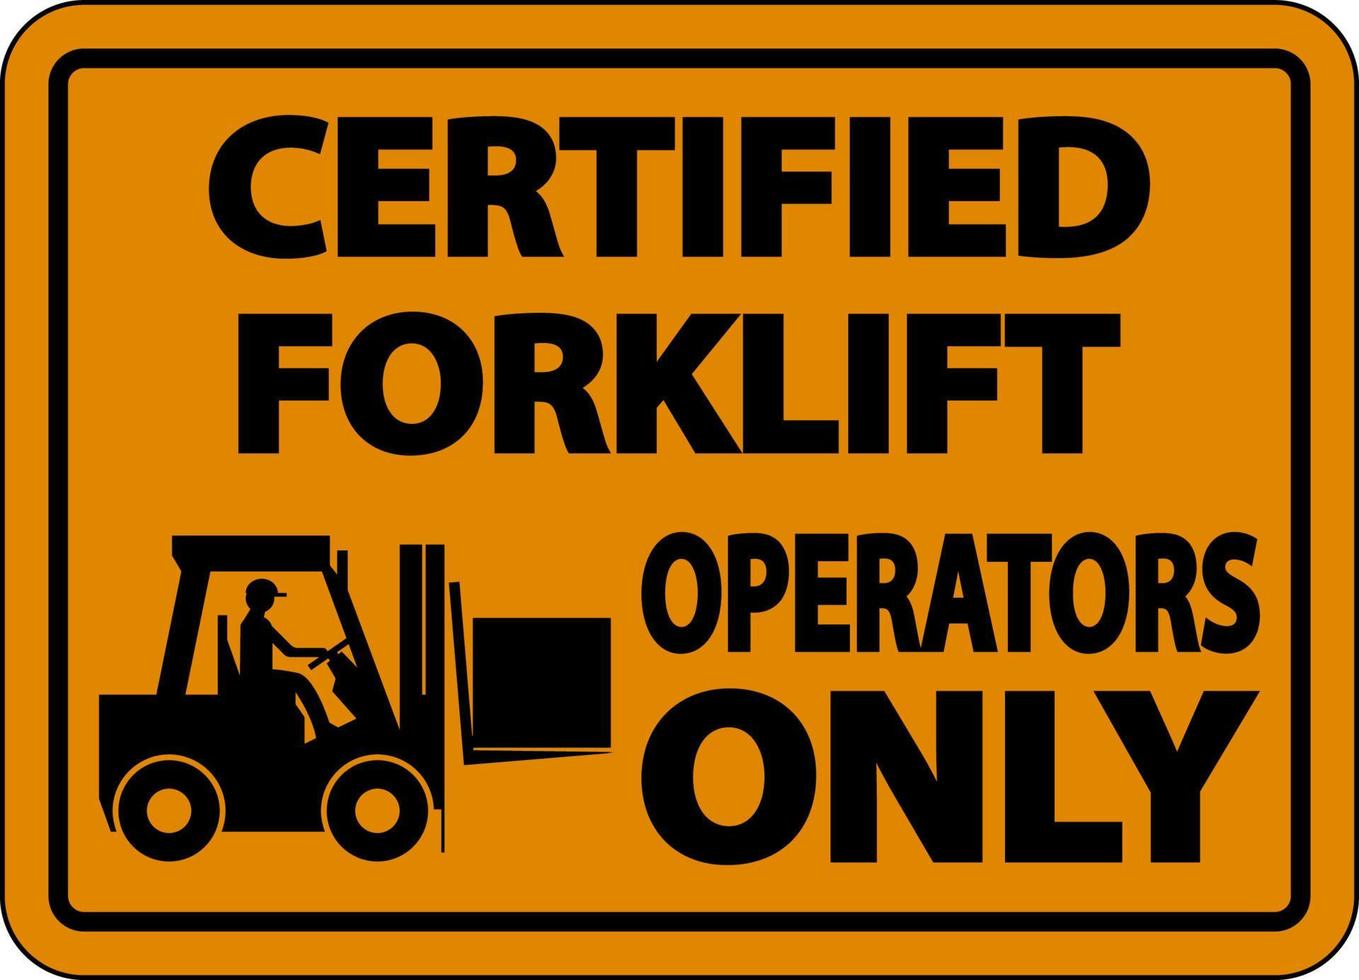 Certified Forklift Operators Only Sign On White Background vector